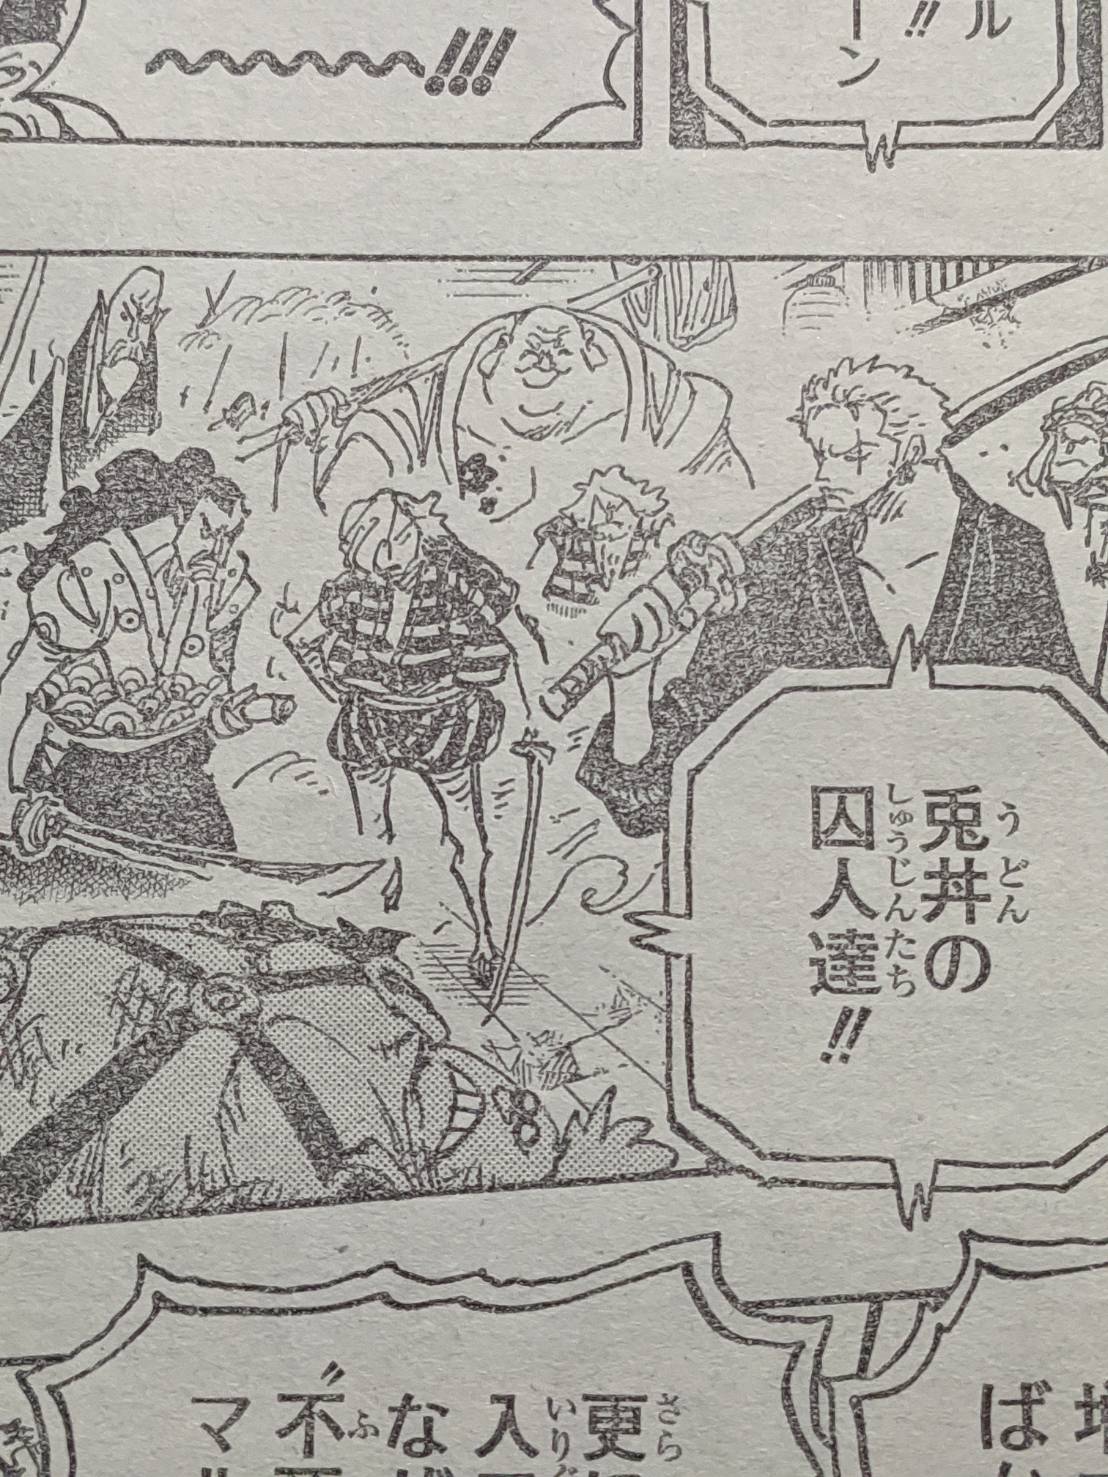 Onepiece9話考察 ゾロvsササキ 閻魔の真骨頂 覇王色覚醒の気配 ワンピース考察 甲塚誓ノ介のいい芝居してますね